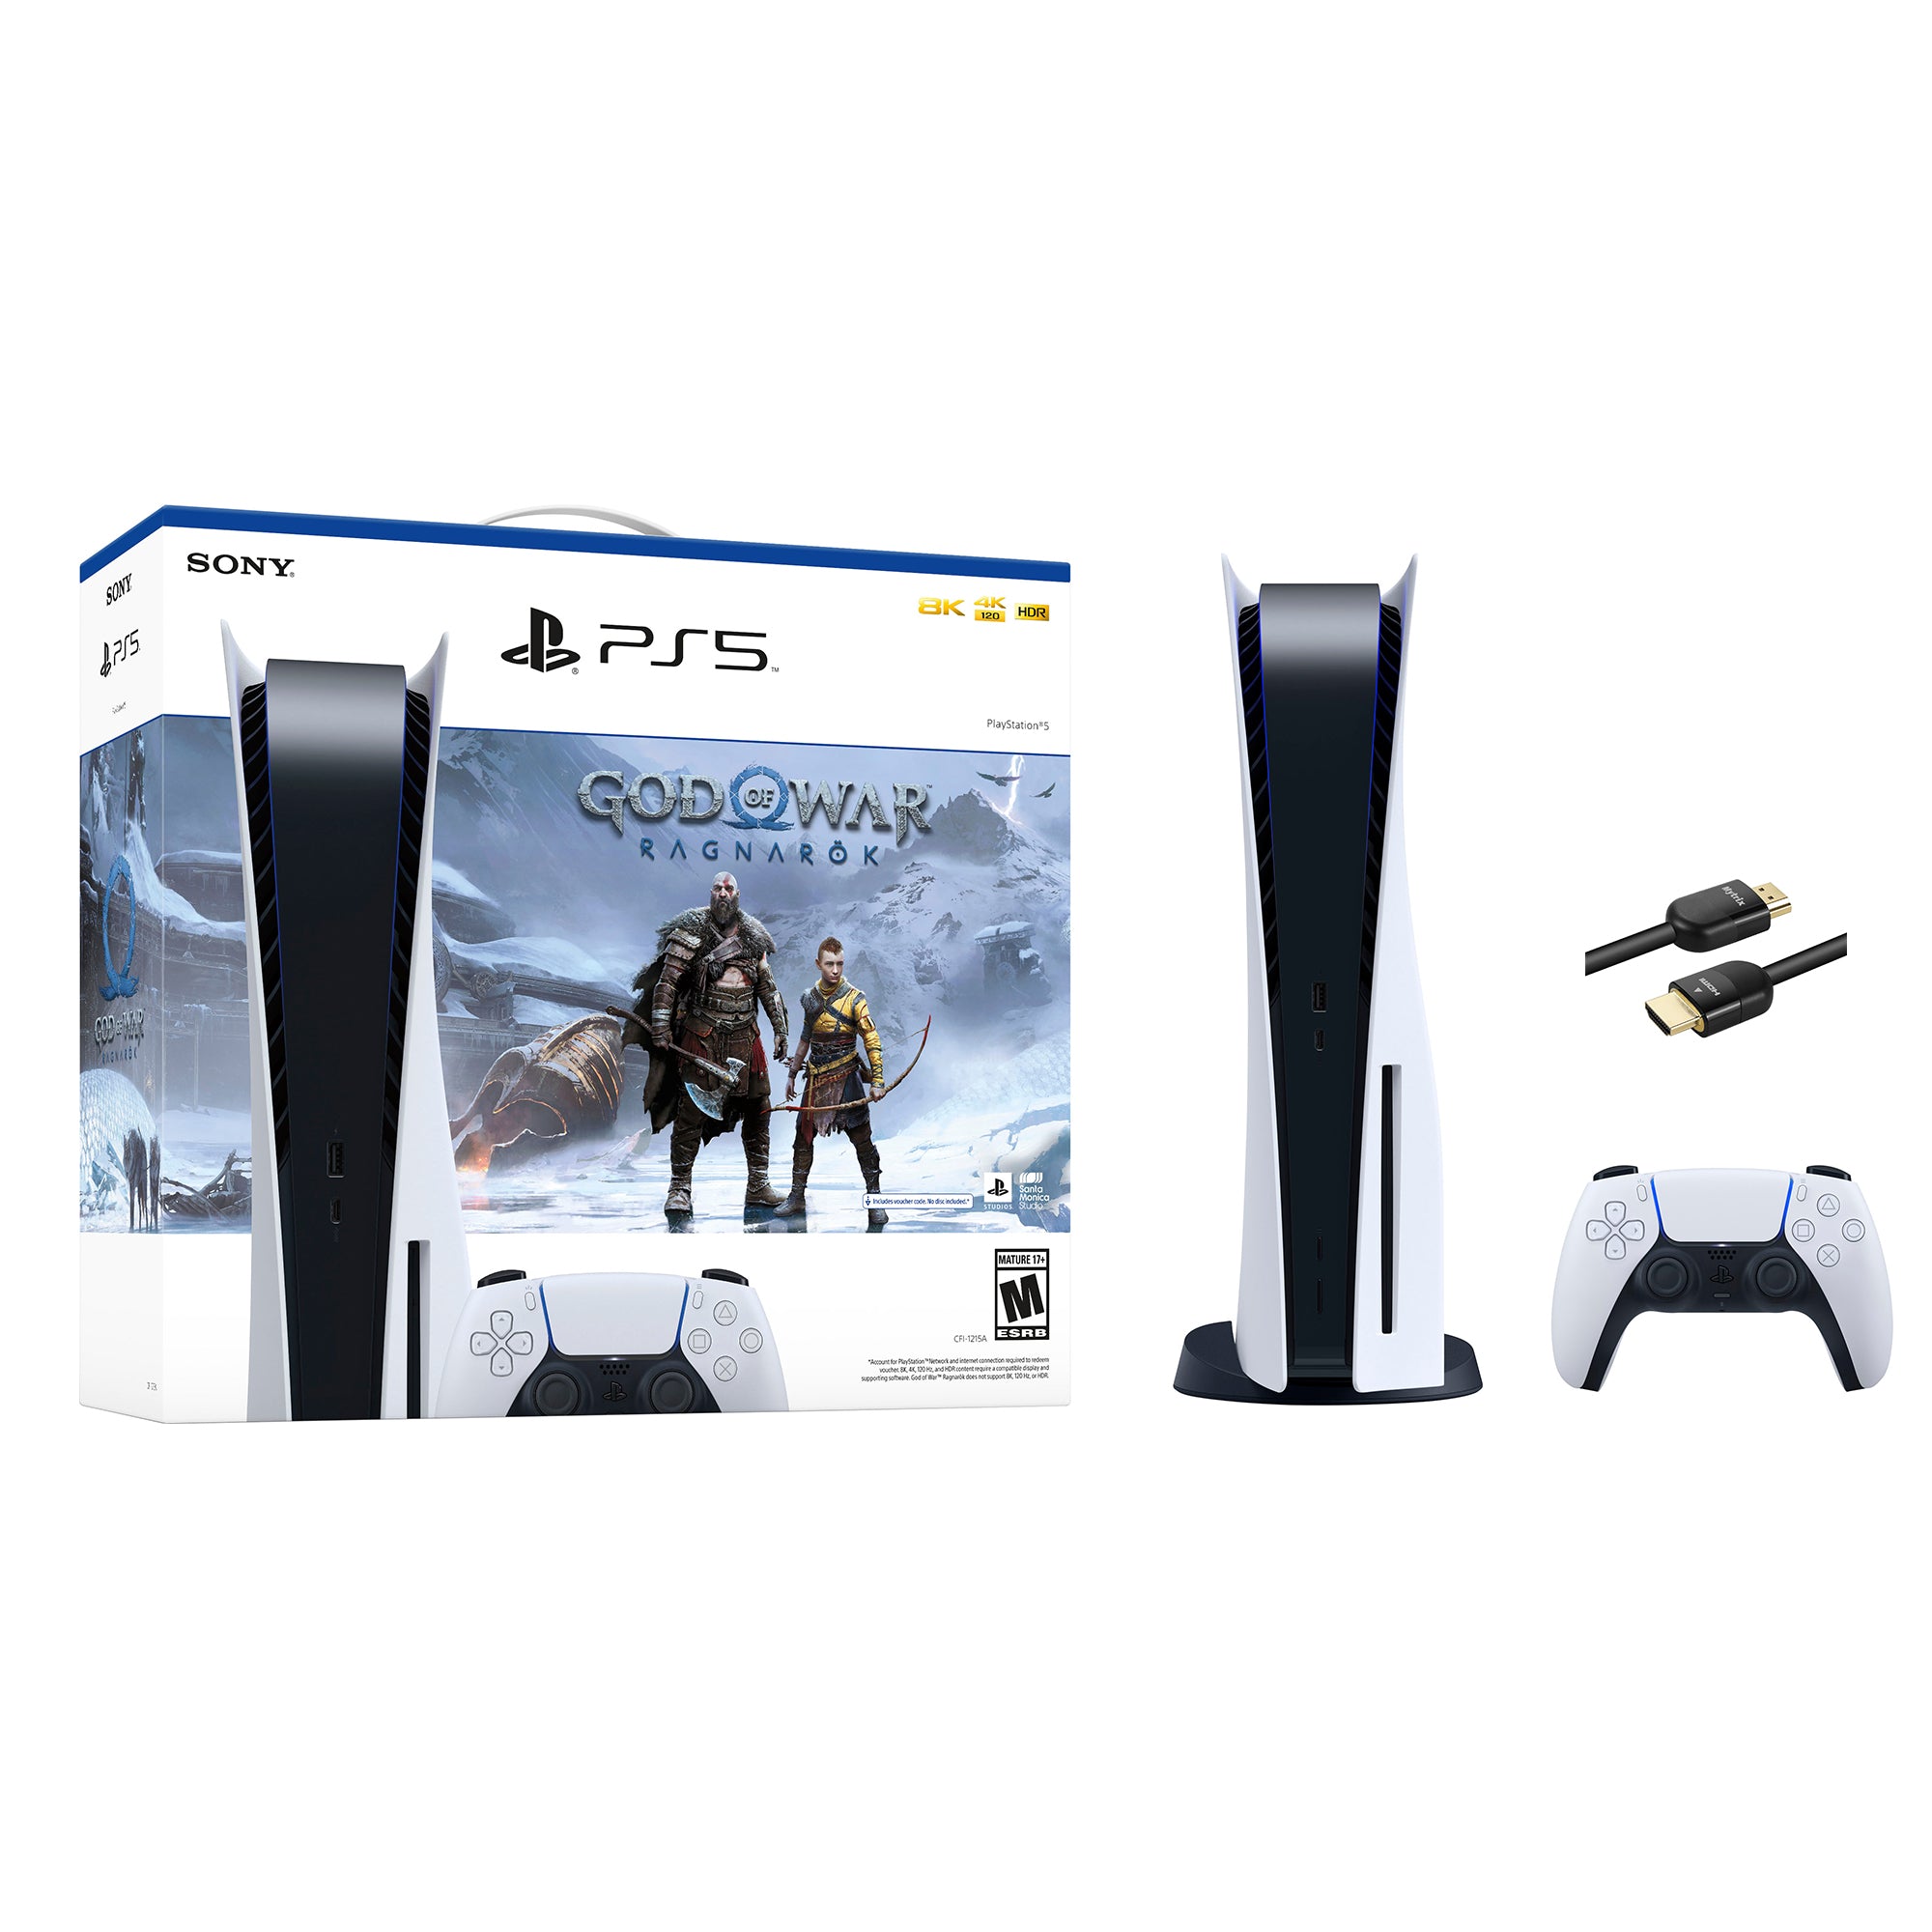 PlayStation 5 Disc Edition God of War Ragnarok Bundle and Mytrix 8K HDMI Ultra High Speed Cable - White, PS5 825GB Gaming Console